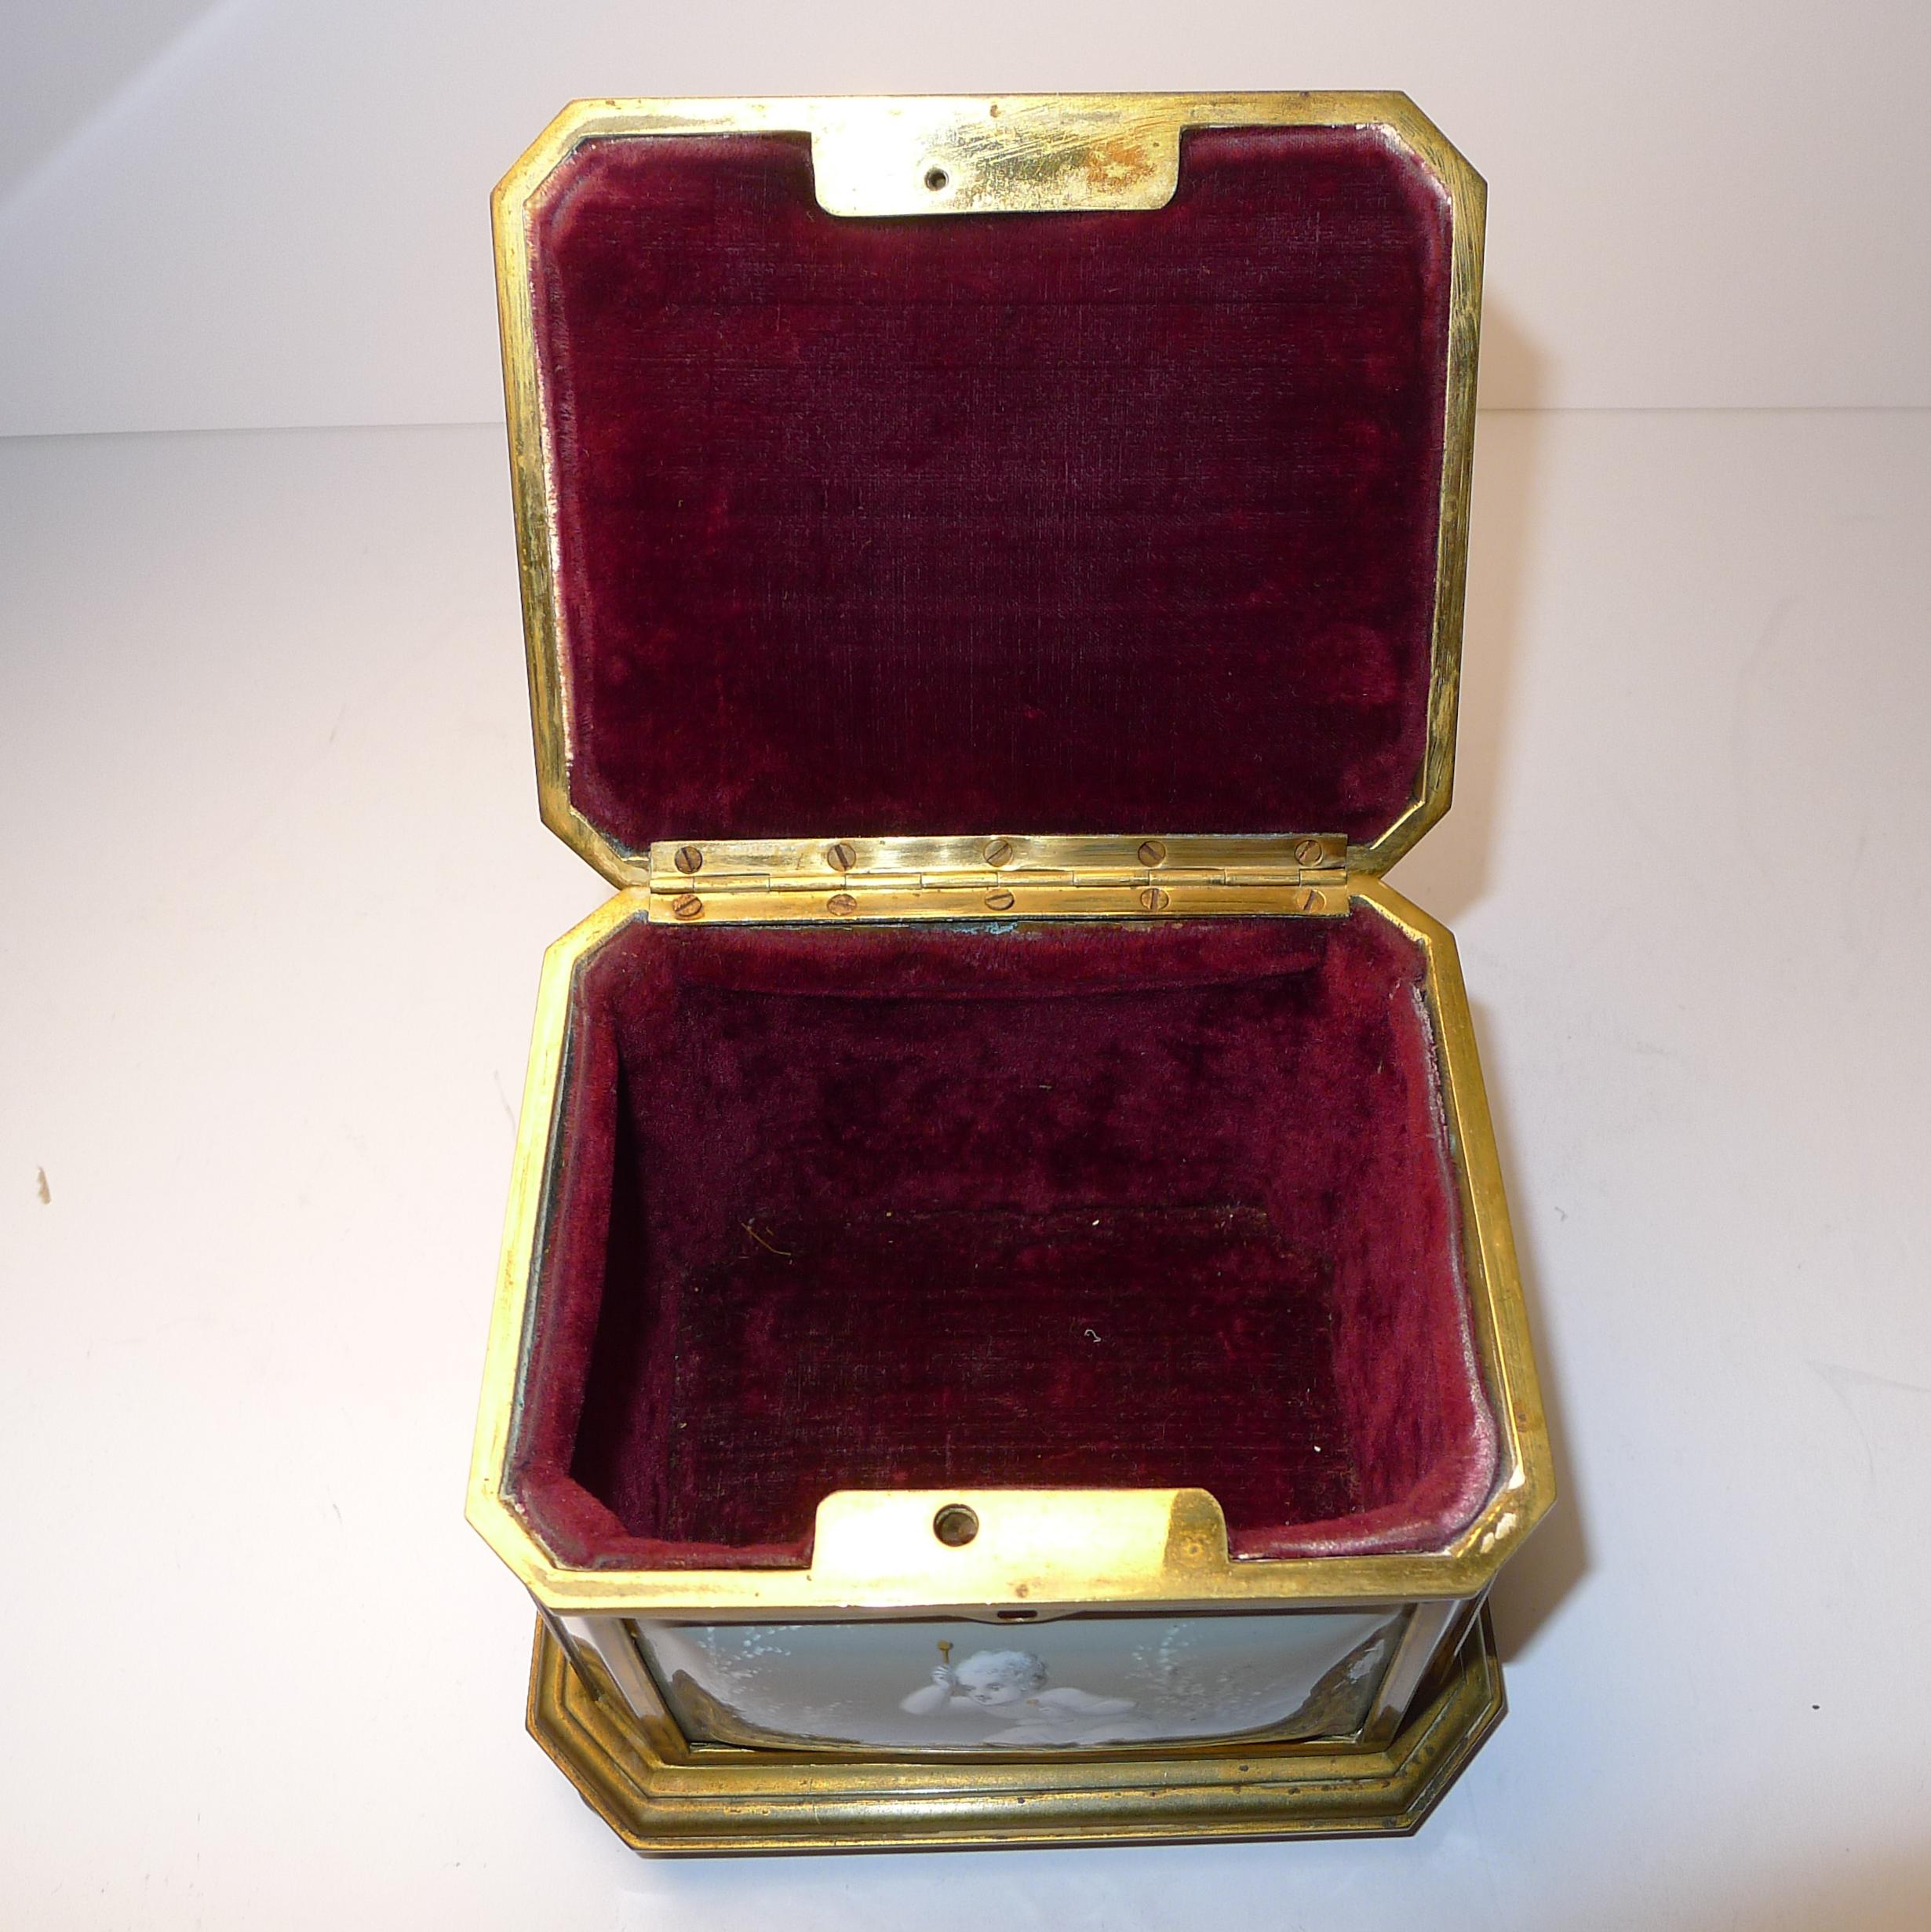 Antique French Limoges Enamel Jewelry Box C.1850 For Sale 4